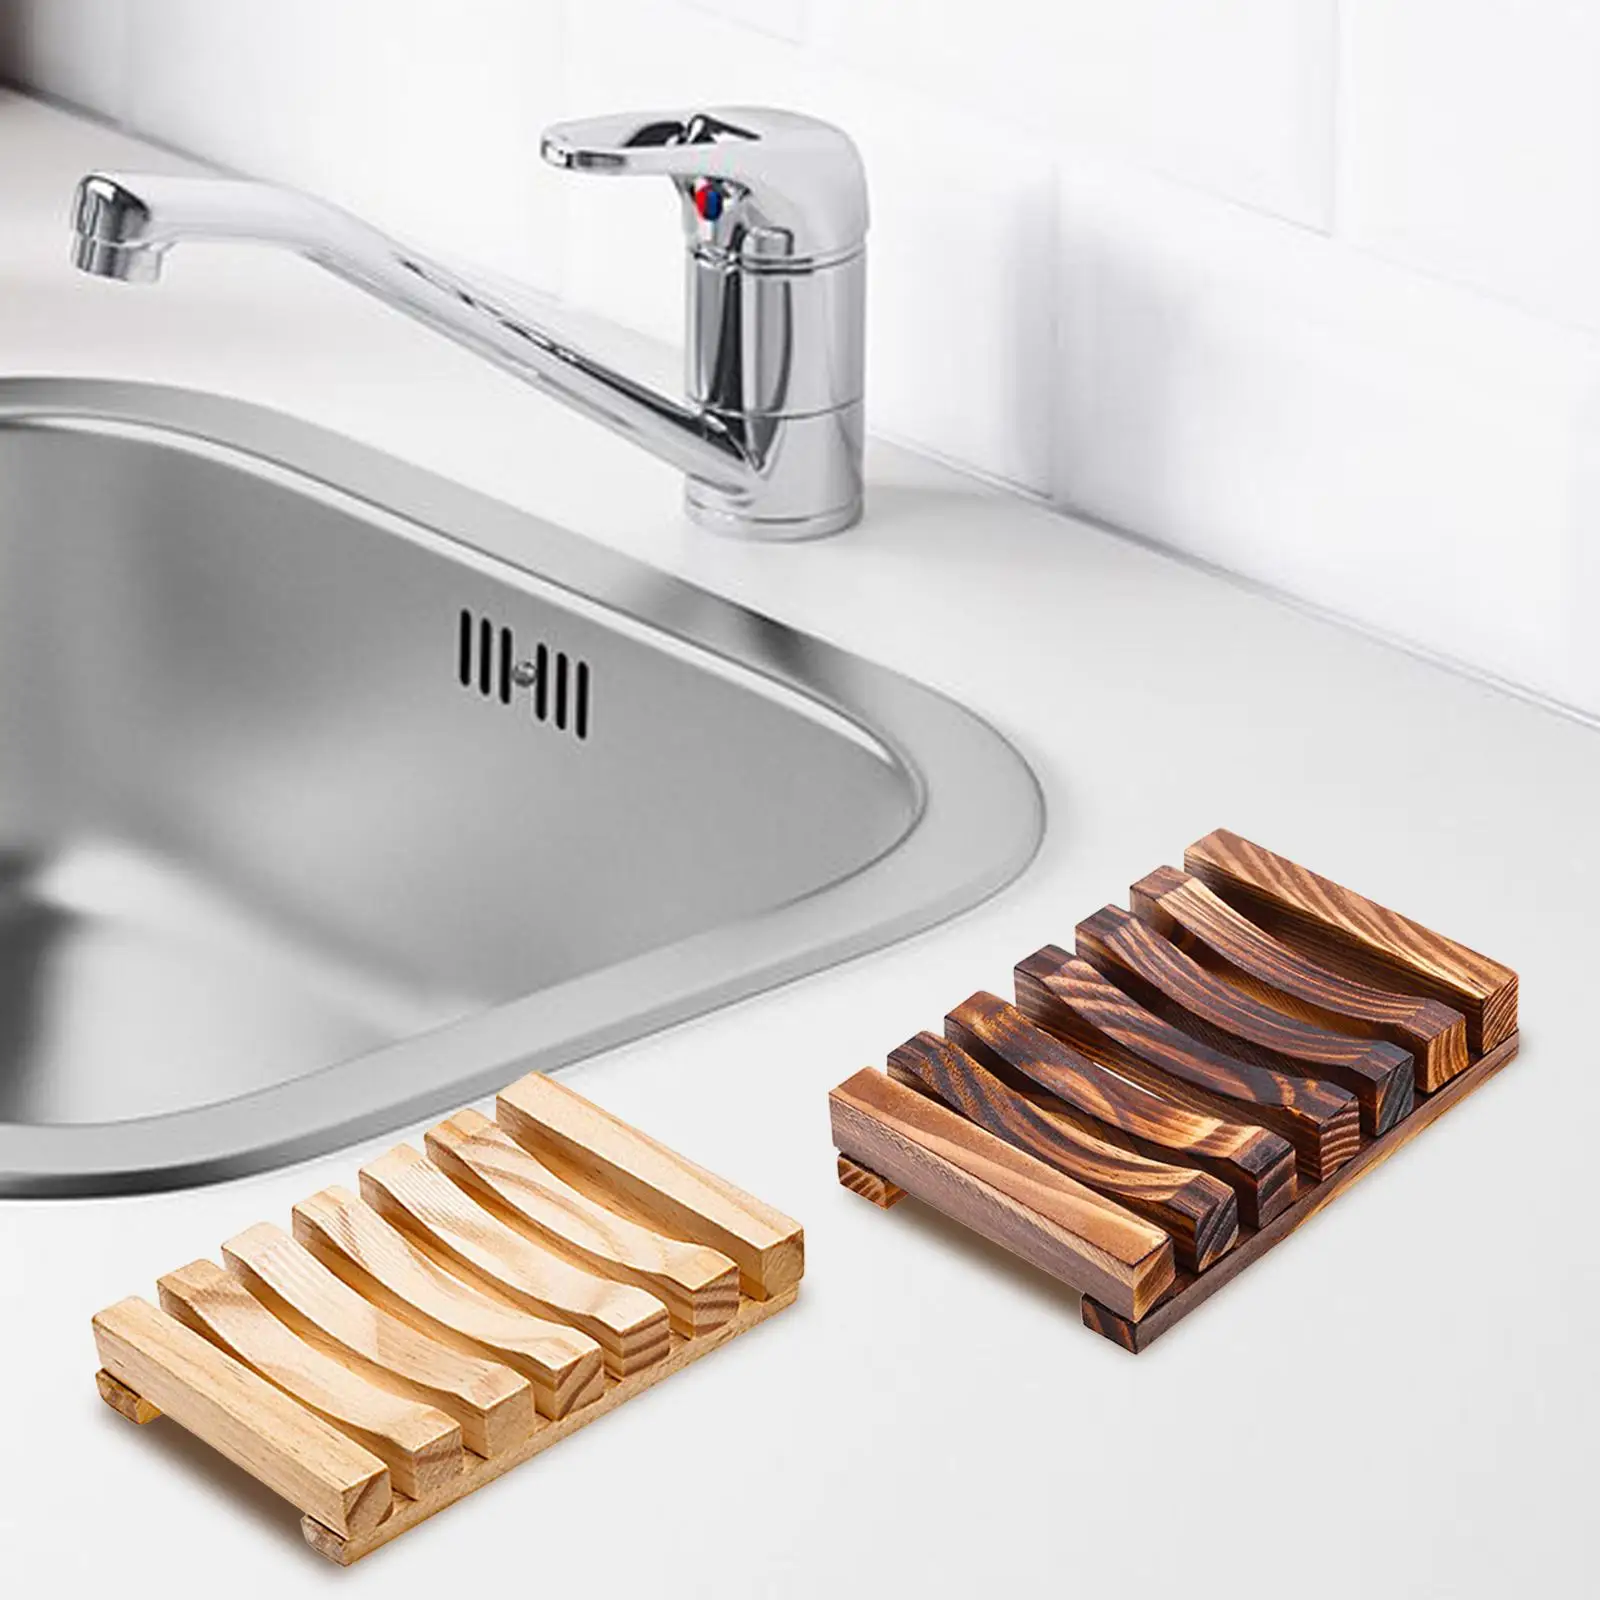 Wood Soap Holder Soap Rack Anti Skid Self Draining Soap Storage Case Not Punched Easy Cleaning Soap Box for Bathtub Counter Gym